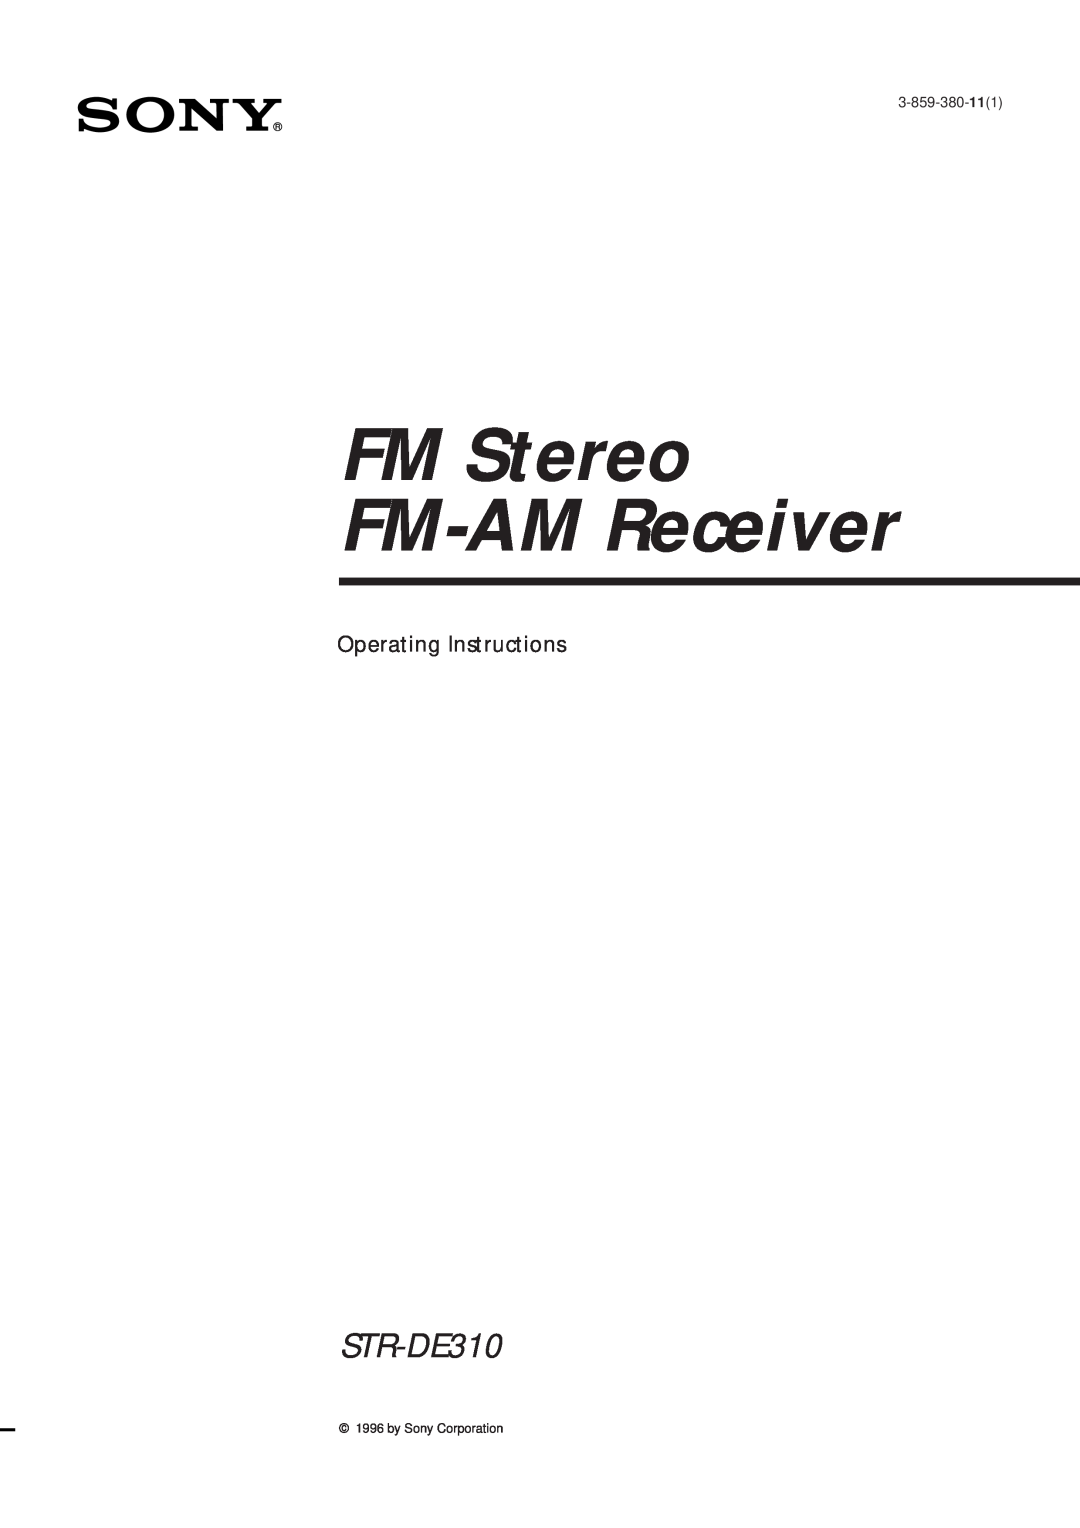 Sony STR-DE310 manual Getting Started, FM Stereo FM-AMReceiver, Operating Instructions, 3-859-380-111, by Sony Corporation 